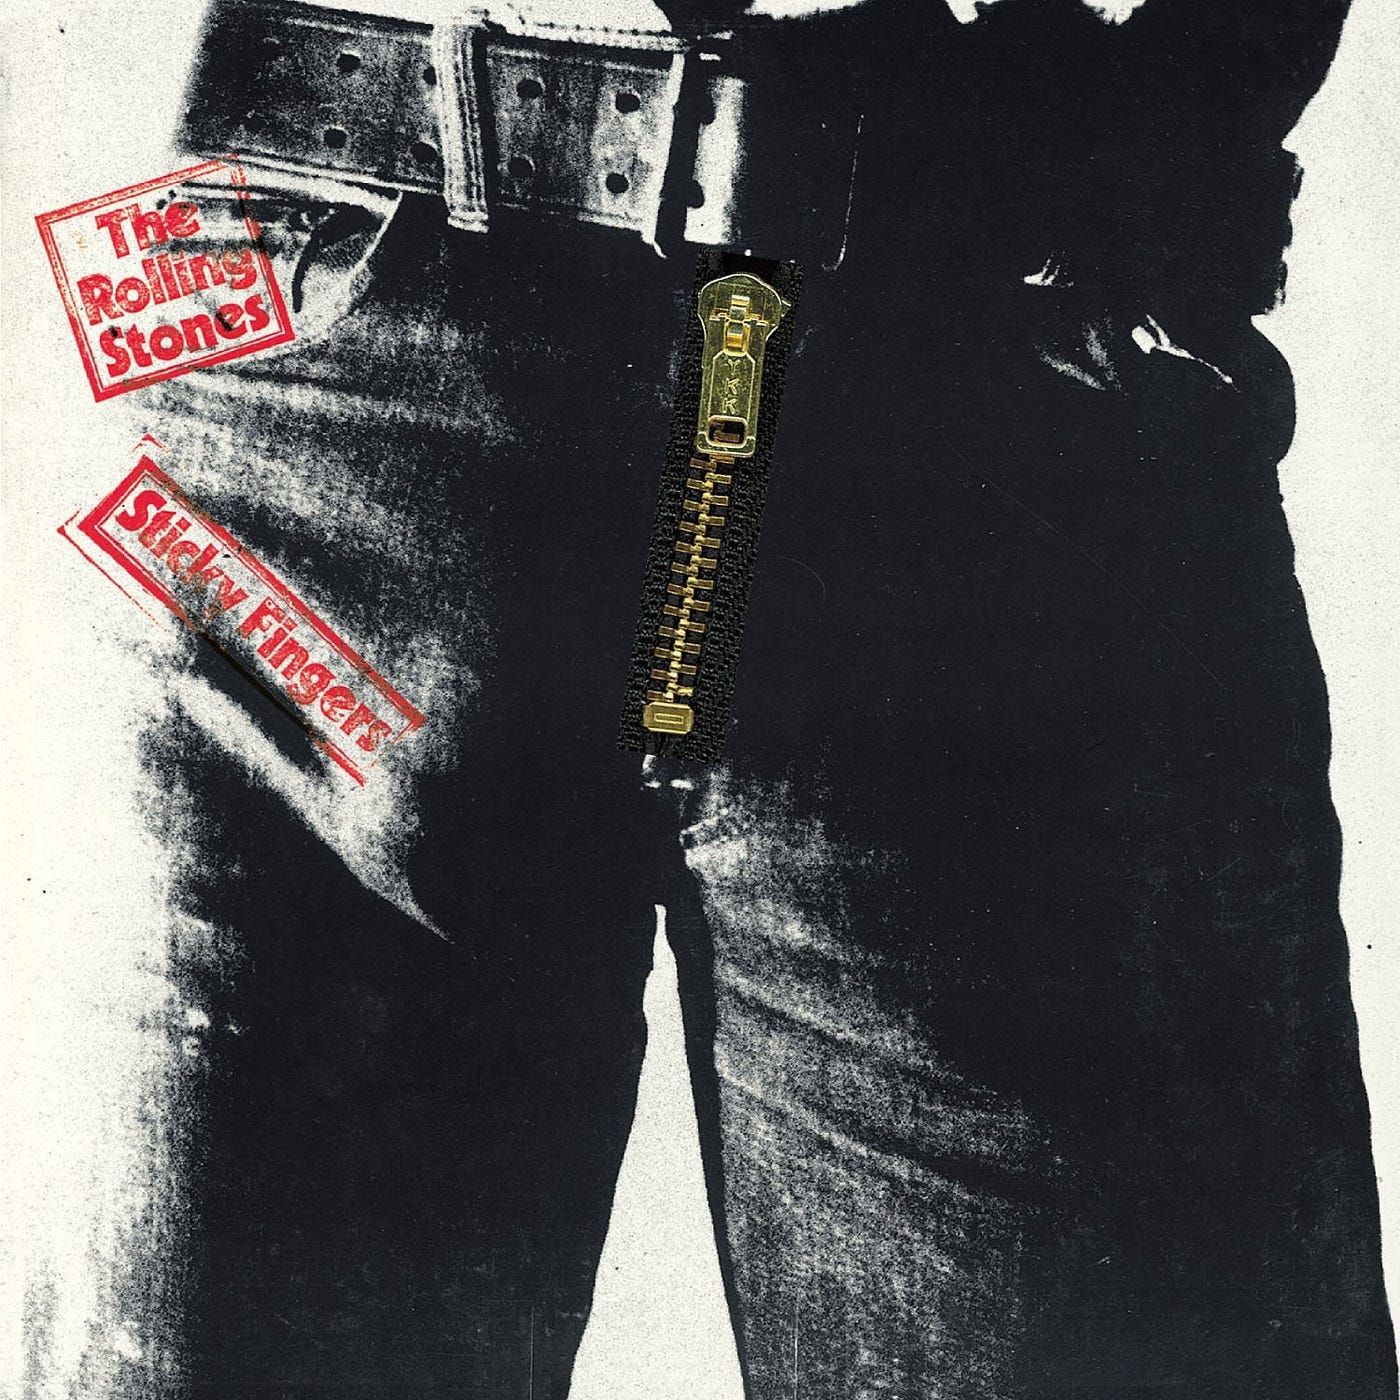 Sticky Fingers': How an Album Cover Defined the Rolling Stones | by David  Deal | Festival Peak